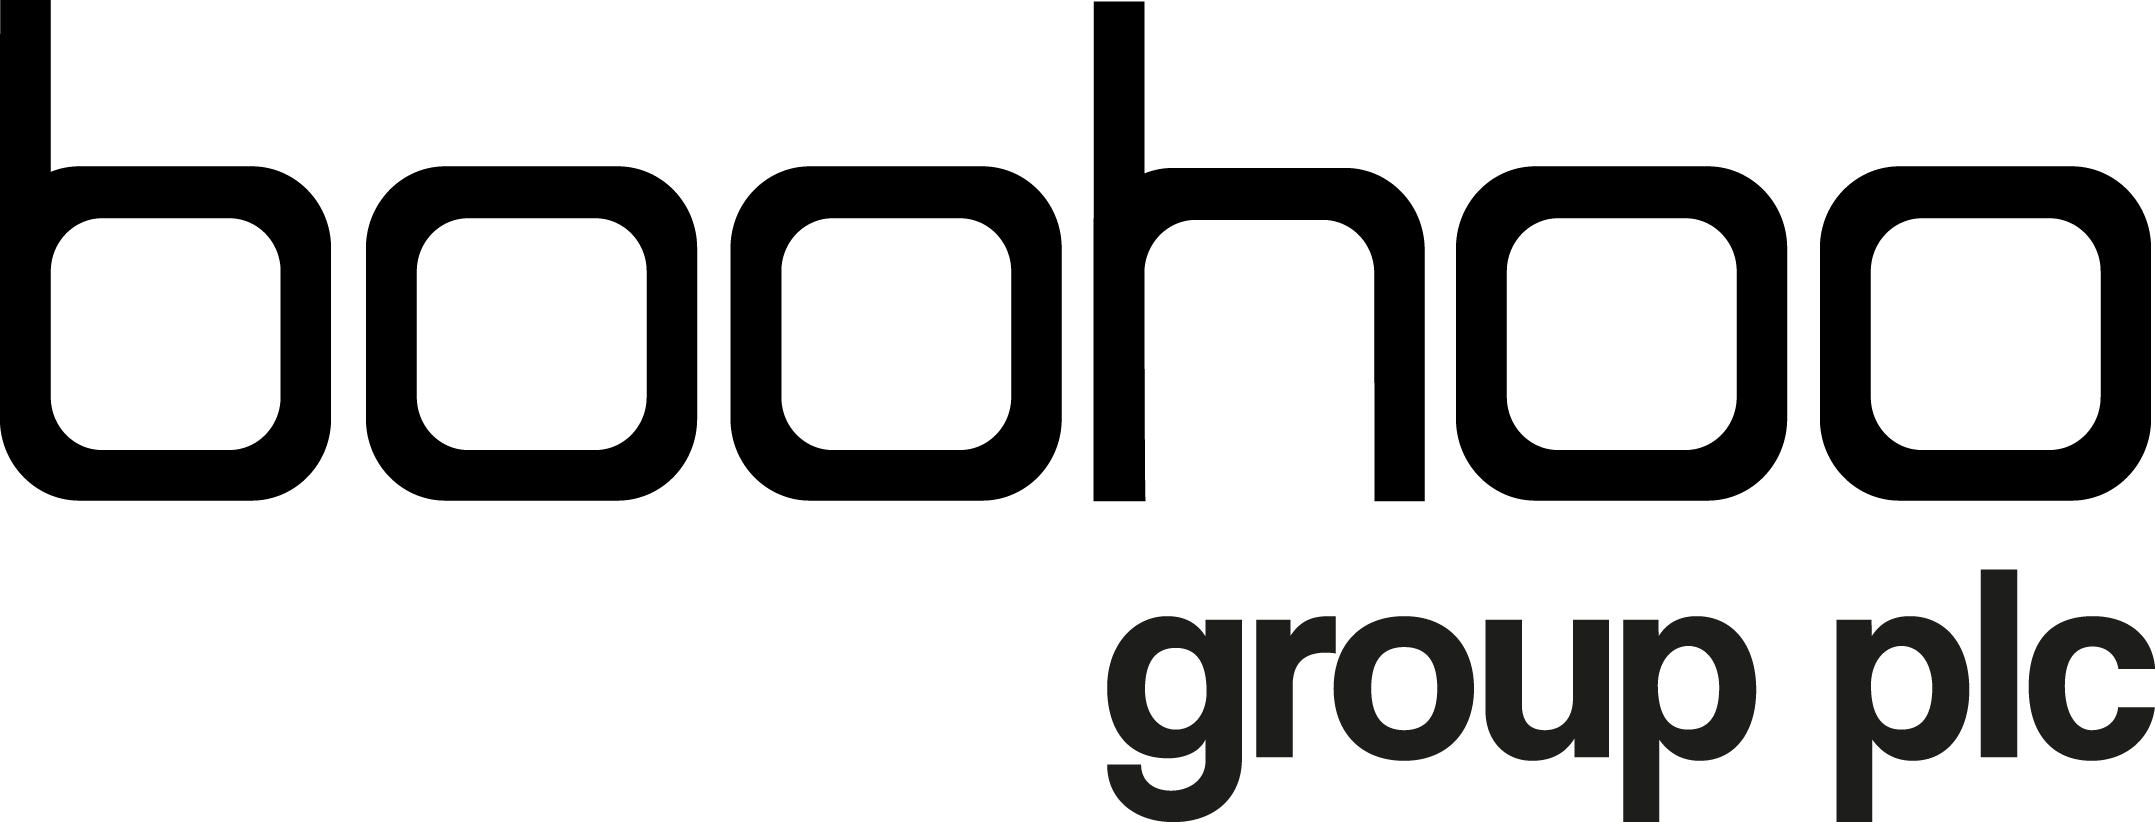 boohoo group welcomes Tim Morris to its Board as Non-Executive Director